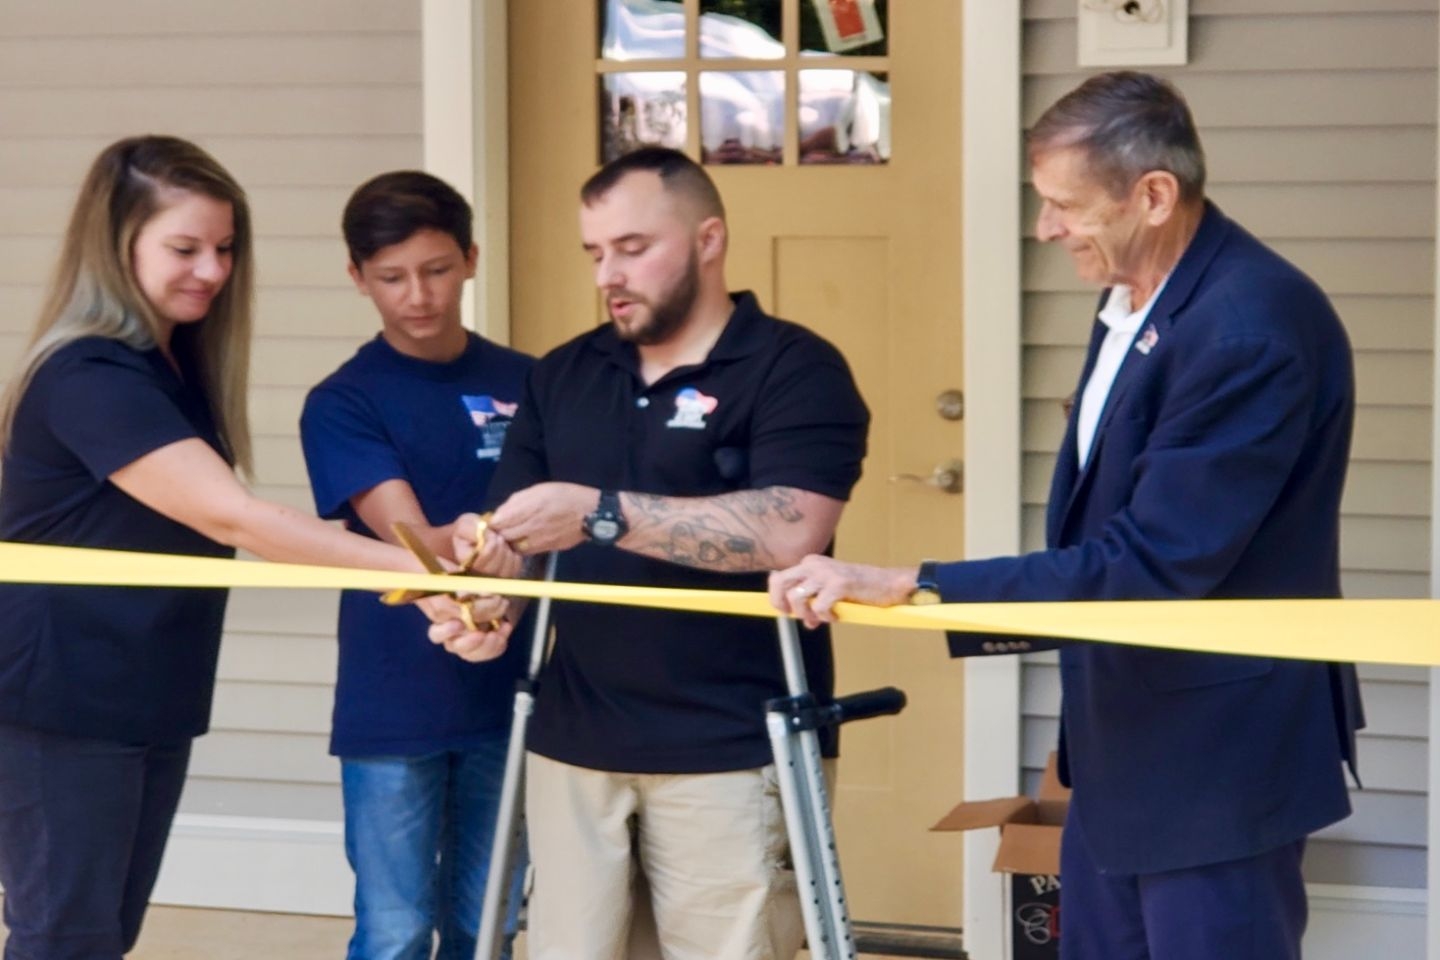 On Saturday, 17 September 2022, Homes for Our Troops presented a new, completely accessible home to Post member, Derrick Sharpe. After Sharpe raised over $35,000 himself toward the costs, the organization funded the rest of the costs. Corporal Sharpe received life-threatening wounds after stepping on an IED in 2006 in Iraq. 